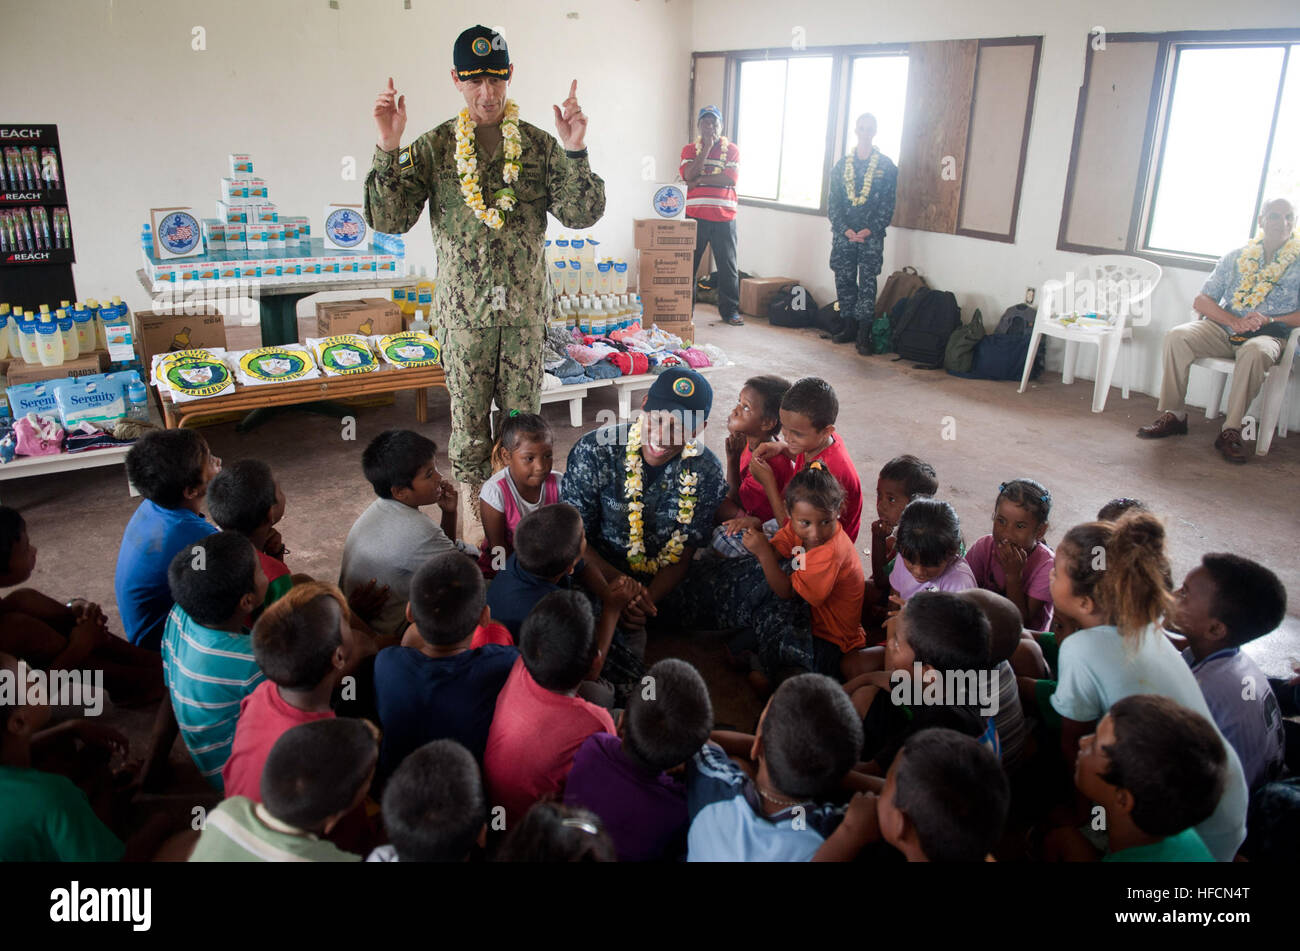 Capt. Wallace Lovely, mission commander of Pacific Partnership 2013, leads children in a chant during a Pacific Partnership community service event to donate clothing and first-aid supplies. Working at the invitation of each host nation, Pacific Partnership is joined by partner nations that include Australia, Canada, Colombia, France, Japan, Malaysia, Singapore, South Korea and New Zealand to strengthen disaster response preparedness around the Indo-Asia-Pacific region. (U.S. Navy photo by Mass Communication Specialist 2nd Class Tim D. Godbee/Released) Pacific Partnership 2013 130709-N-SK590-5 Stock Photo